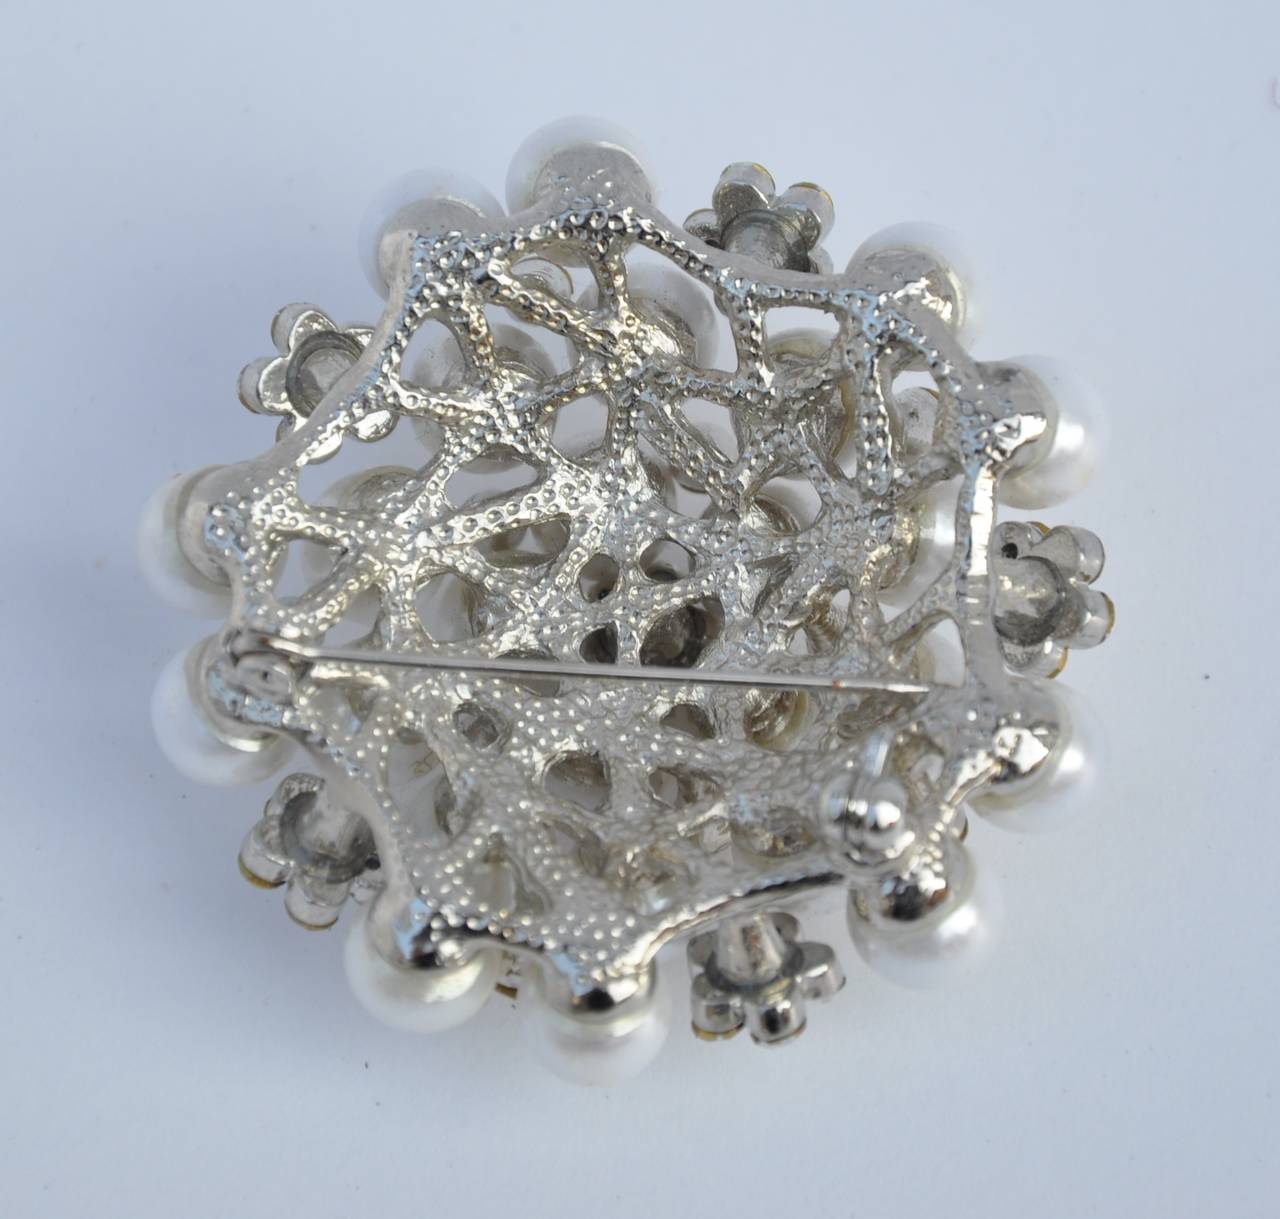 This wonderfully elegant large brooch combined with multi-rhinestones and pearls measures 2" in circumference with a depth of 3/4". Pearls and rhinestones are set in polish silver hardware for this elegant brooch.